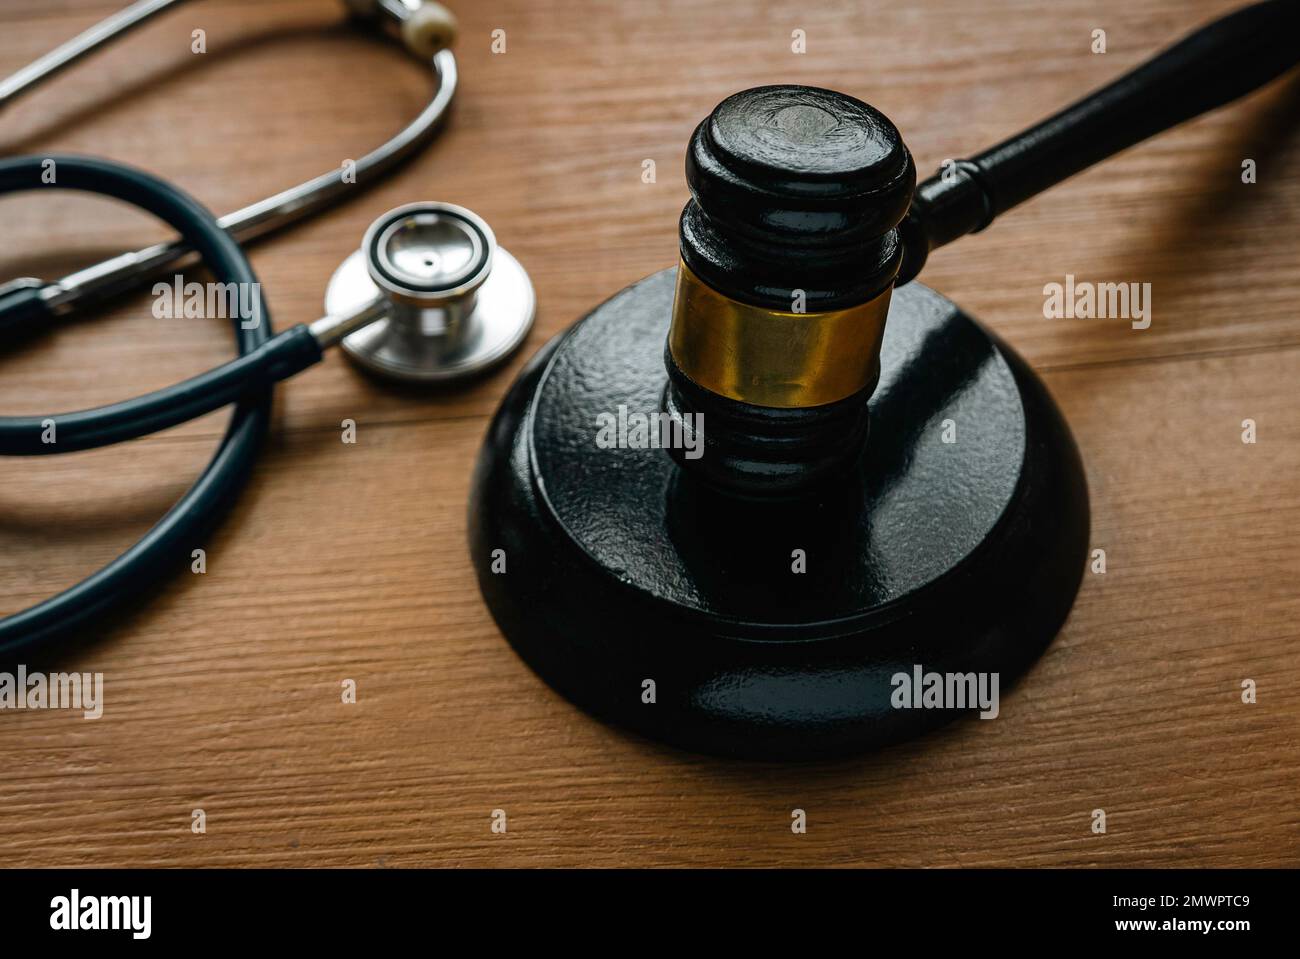 Law in healthcare and medical. Medical malpractice, personal injury law.Judgement of common mistakes made by nurses,doctors or hospital. Gavel and ste Stock Photo